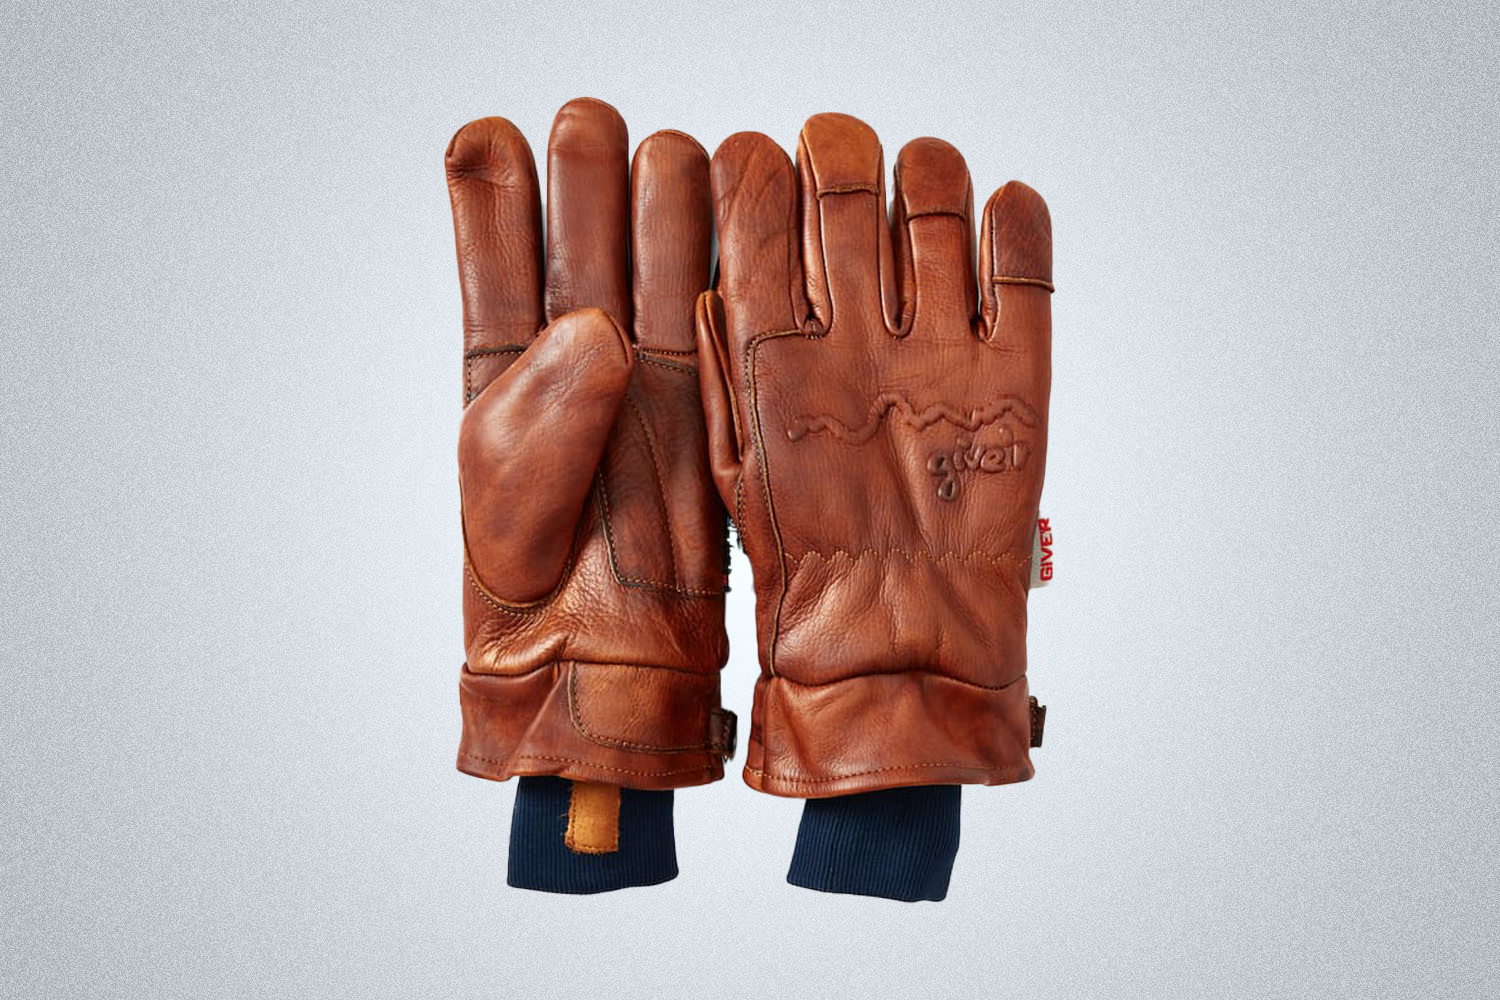 A pair of Giv'r 4 Season Gloves are perfect for every task, from shoveling snow to working in the yard in 2021